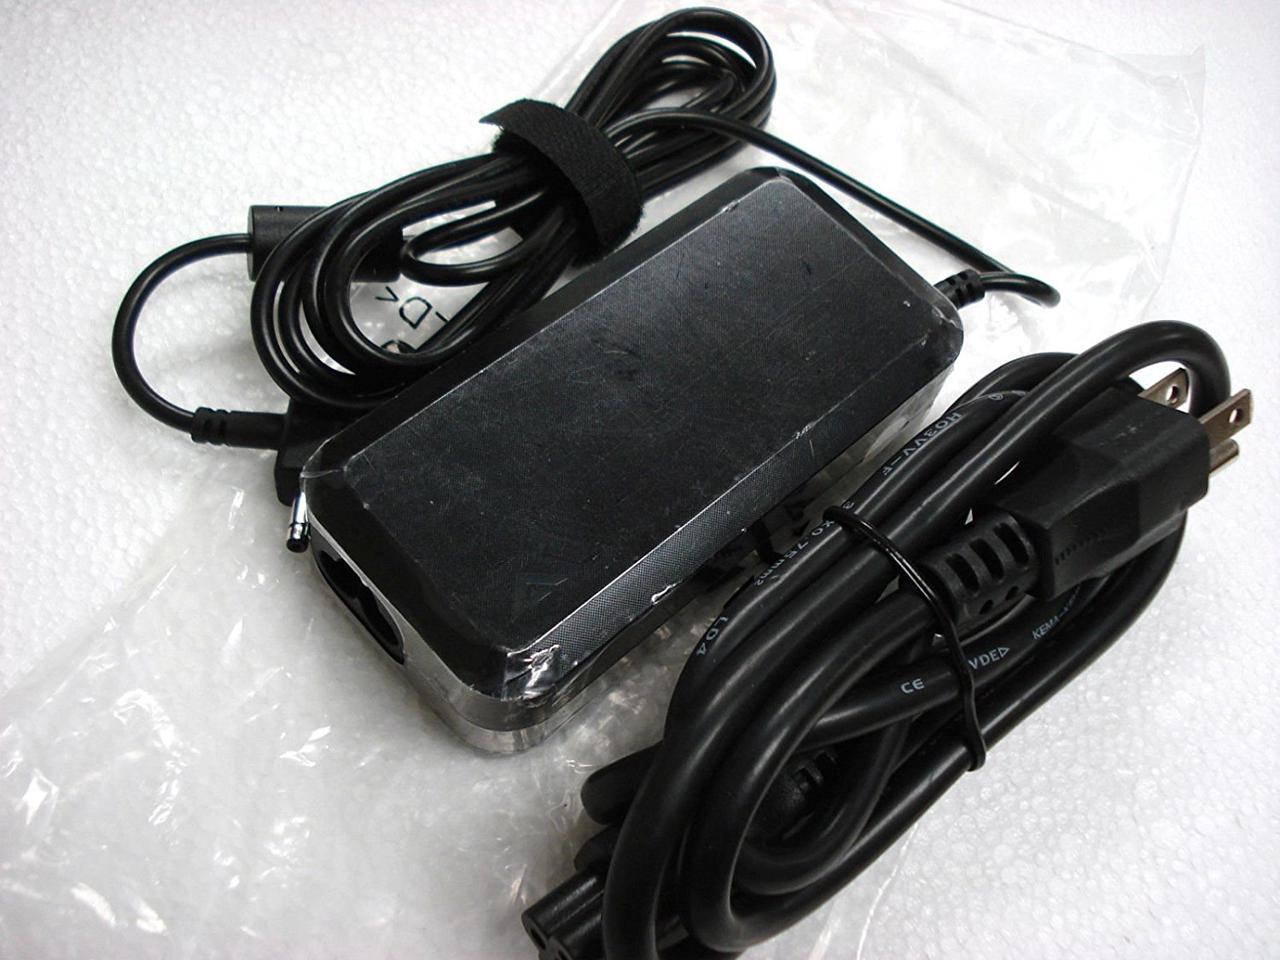 AC Adapter for Vizio CT14-A0 CT14-A1 Ultrabook Laptop Charger Power CT15 Supply 